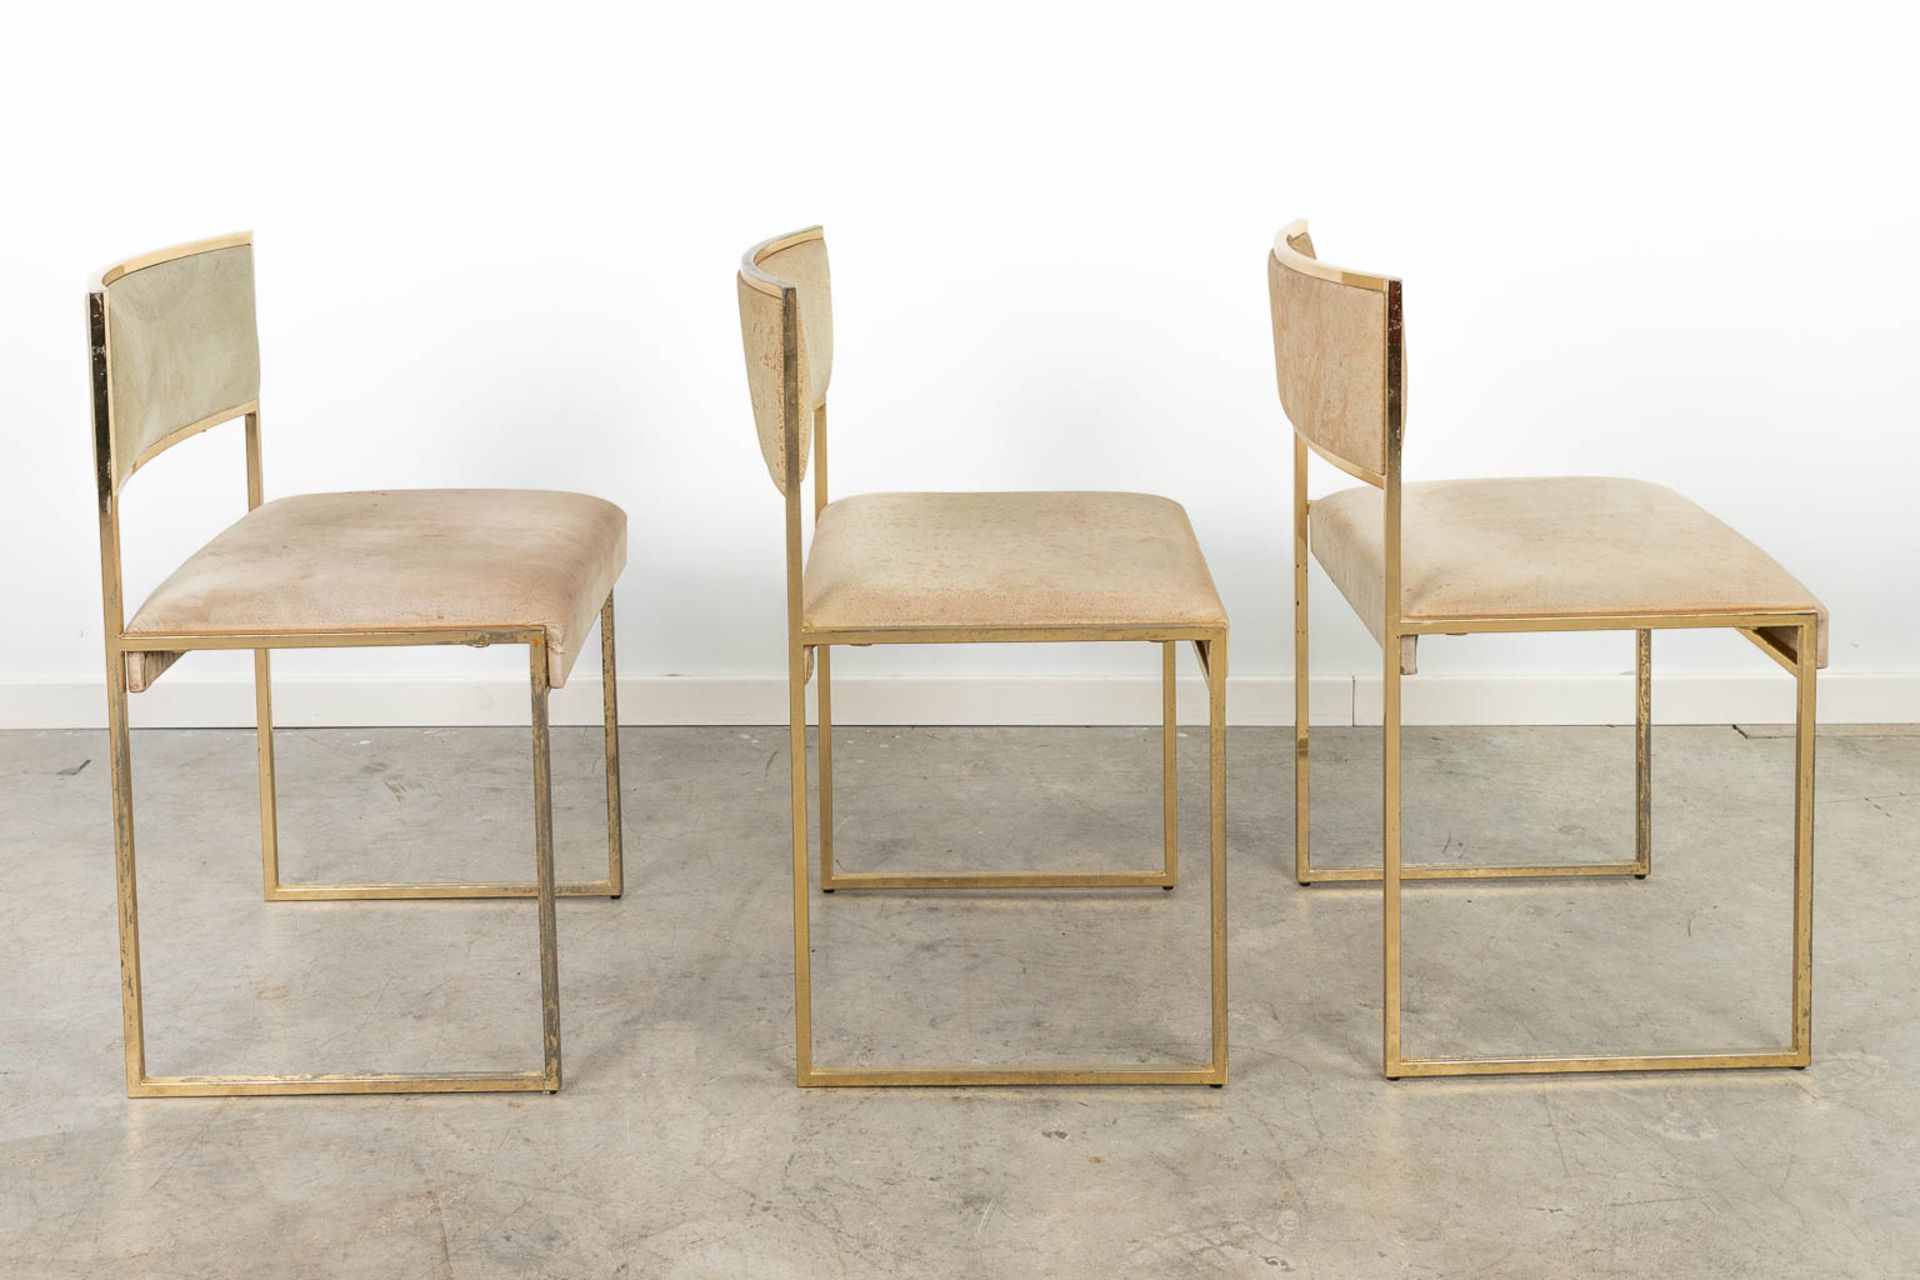 Willy RIZZO (1928-2013)ÊSet of 3 chairs, made of gold plated brass. Circa 1970. (49 x 48 x 78cm) - Image 14 of 14